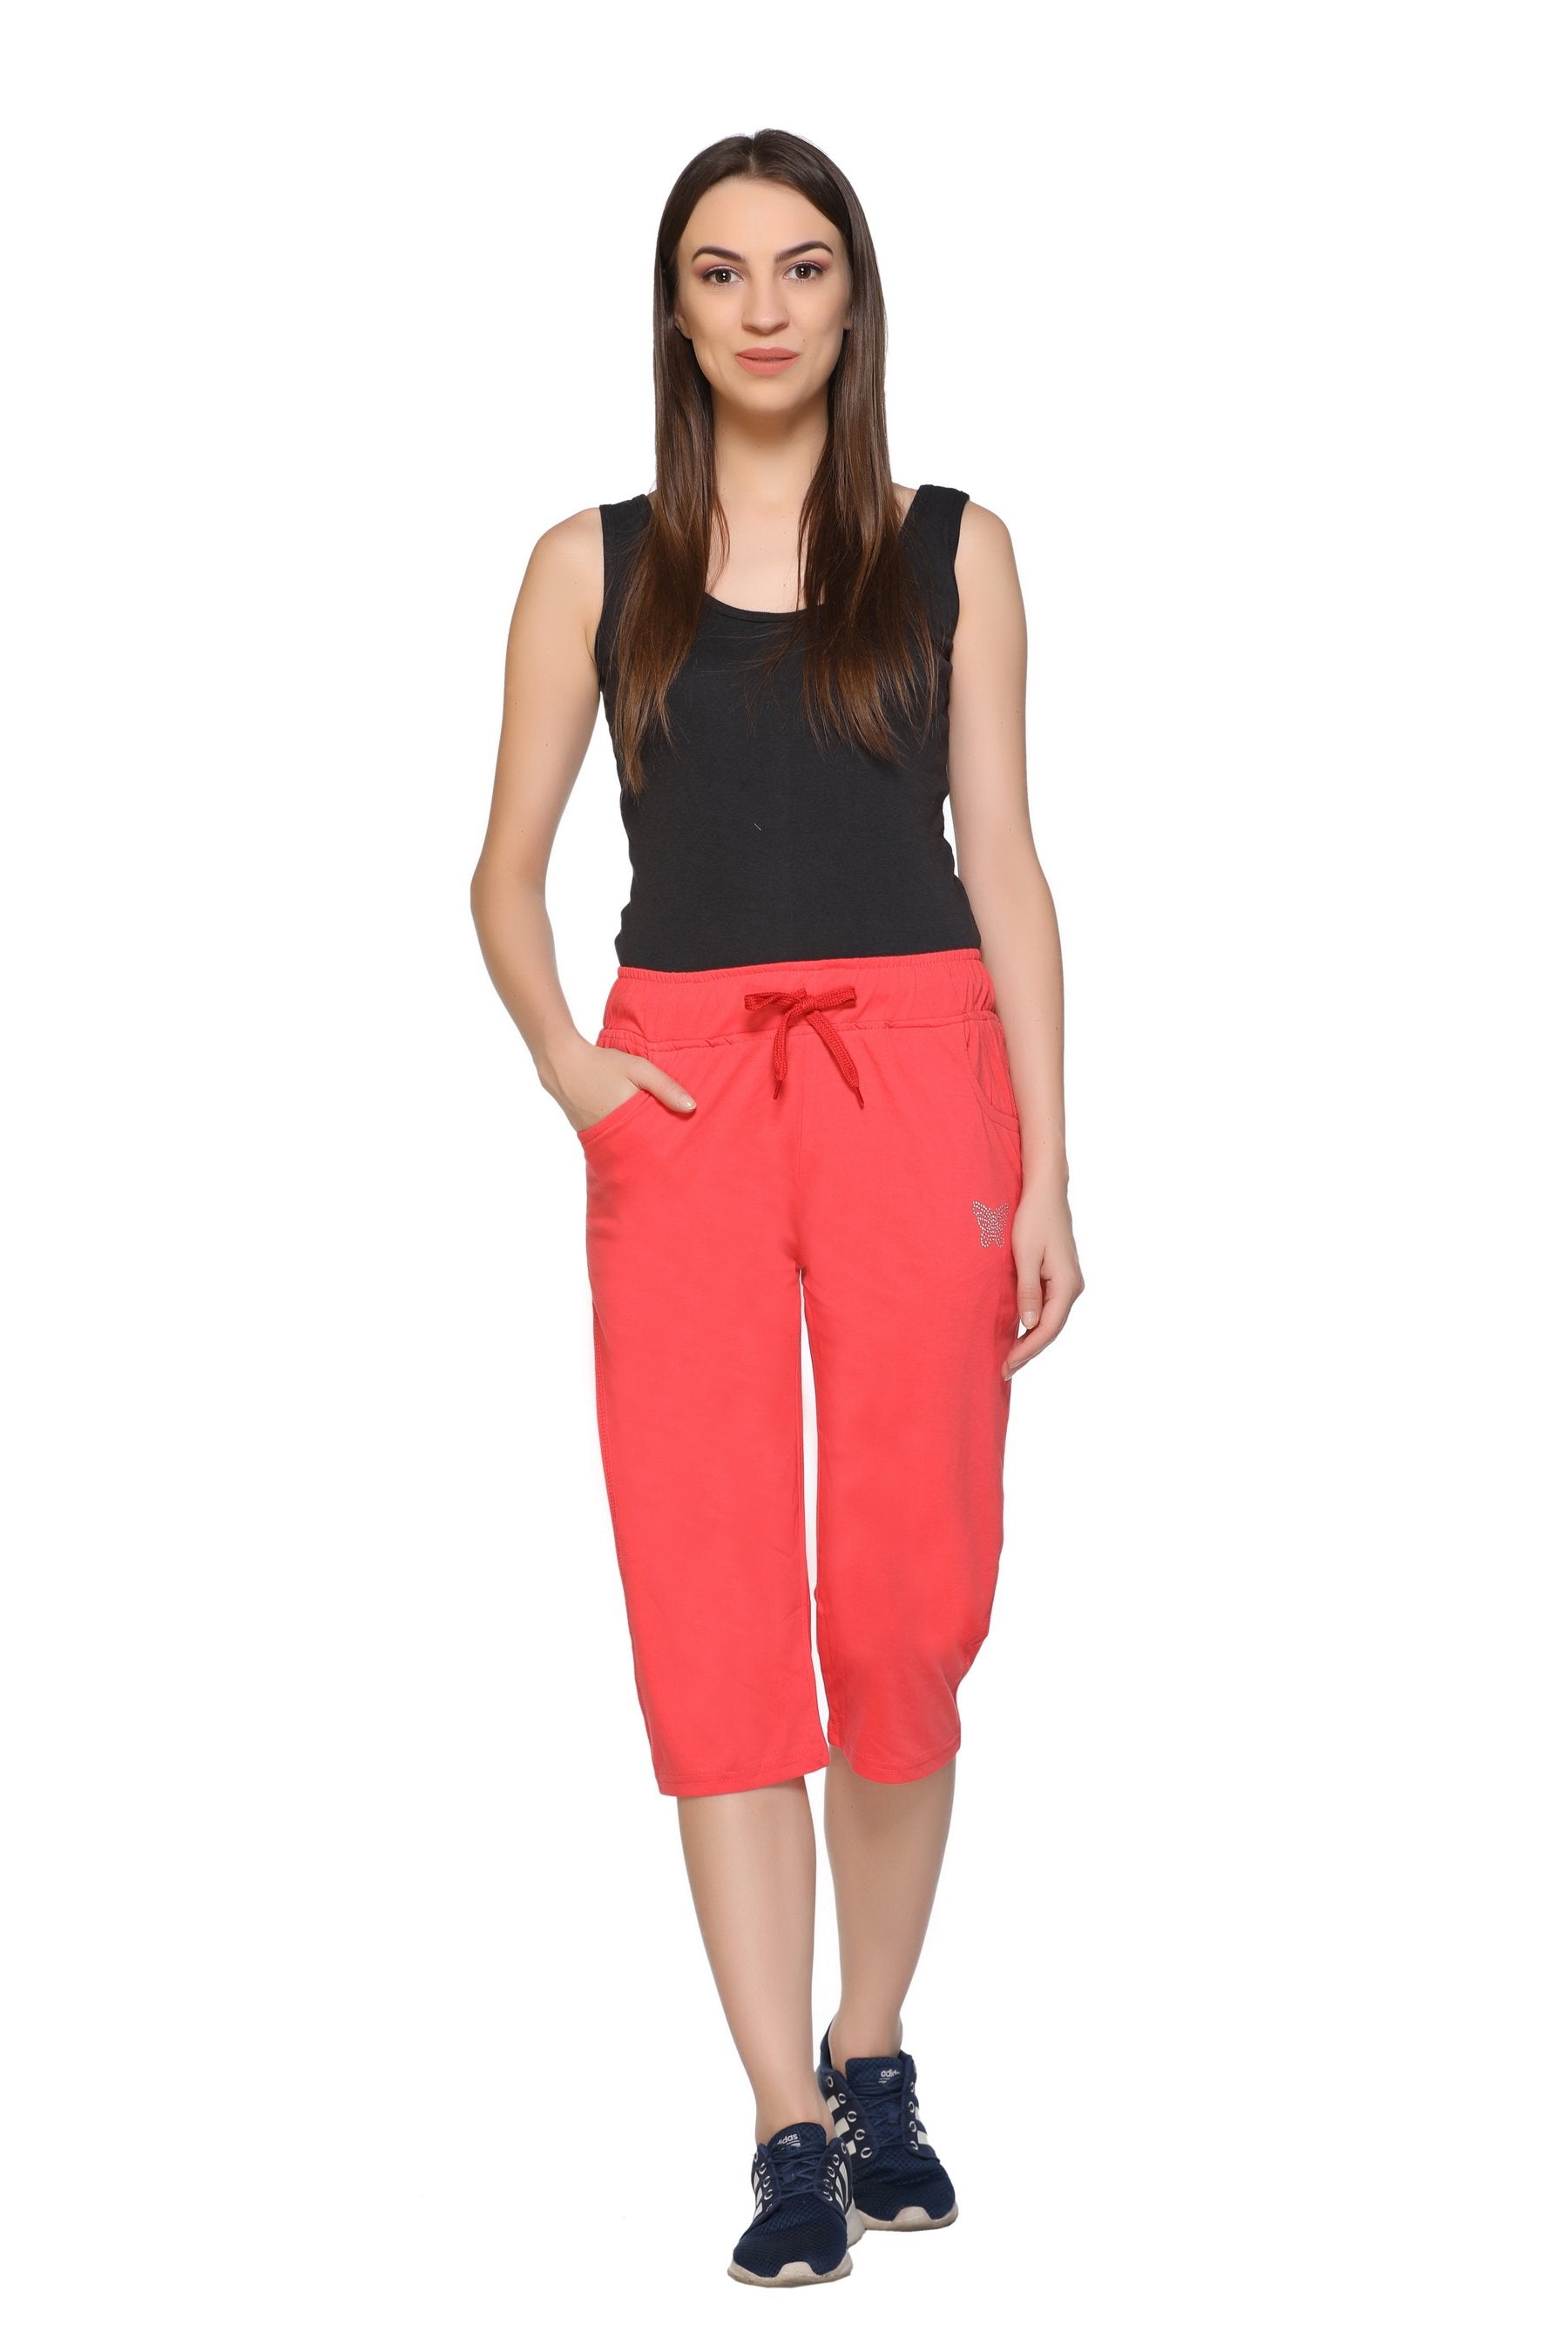 Buy Comfy Red Half Cotton Capri Pants For Women Online In India By